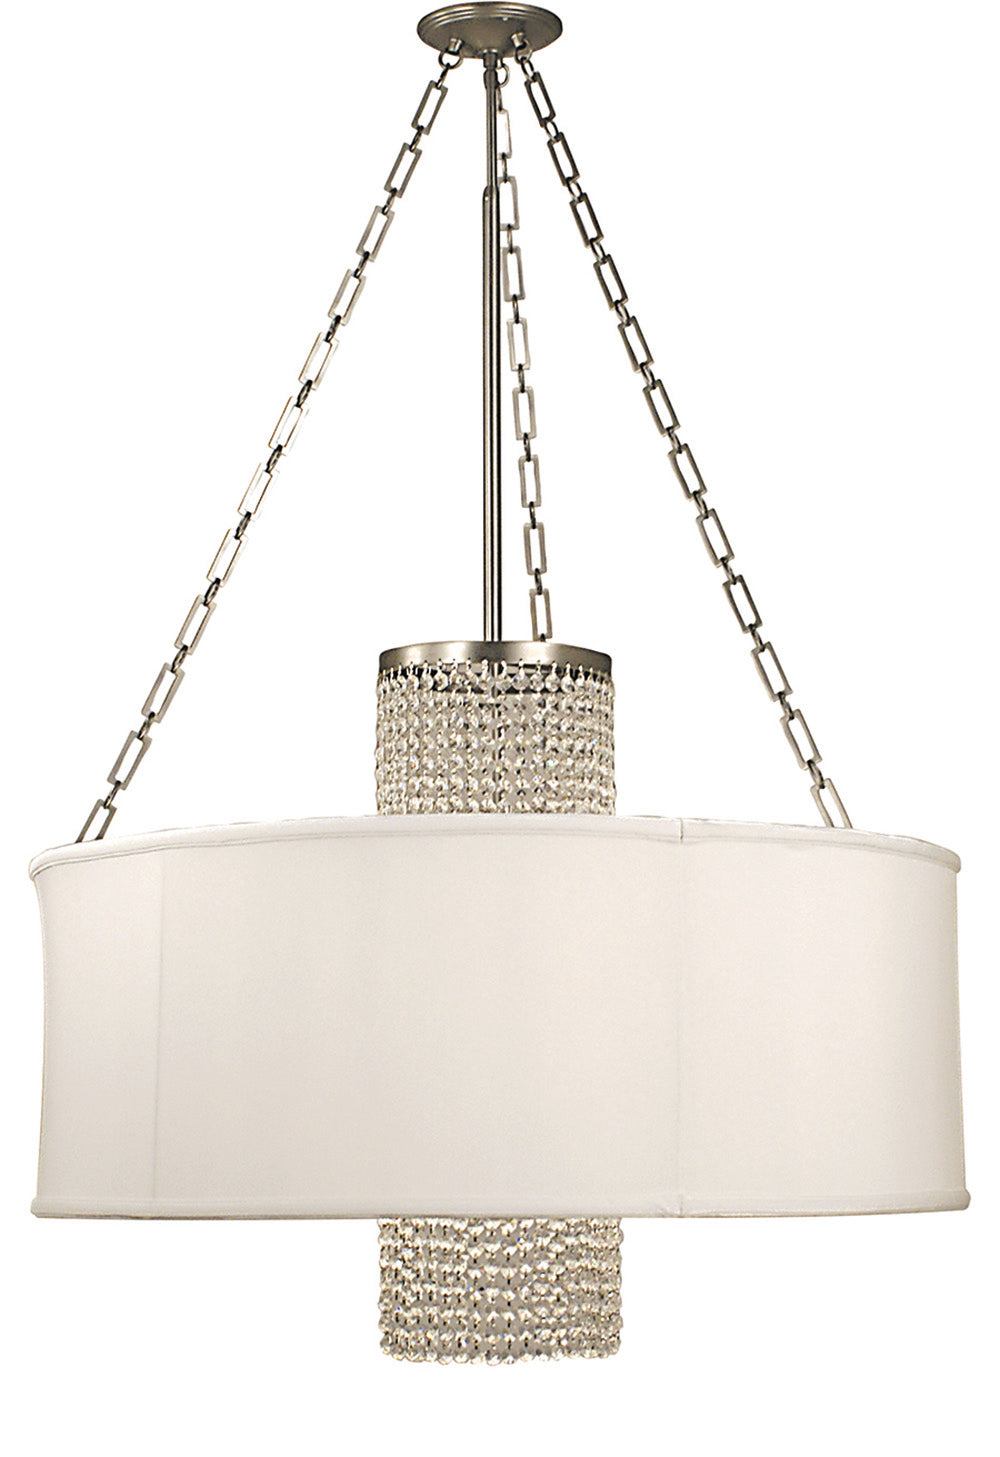 Framburg Angelique 4 - Light Polished Silver with White Sheer Shade Dining Chandelier 1958 PS/SWH